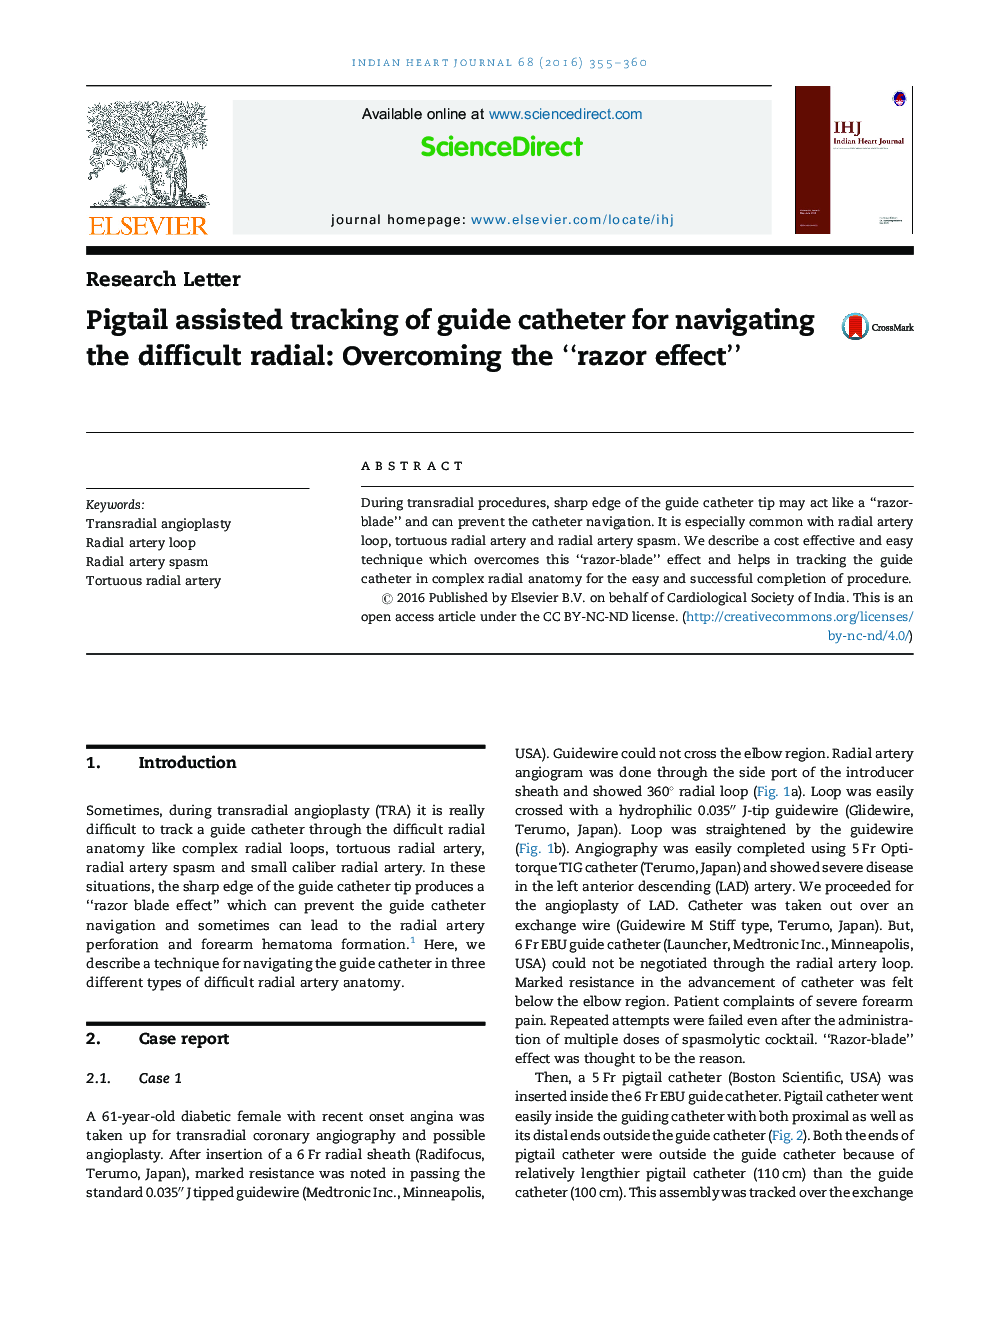 Pigtail assisted tracking of guide catheter for navigating the difficult radial: Overcoming the “razor effect”